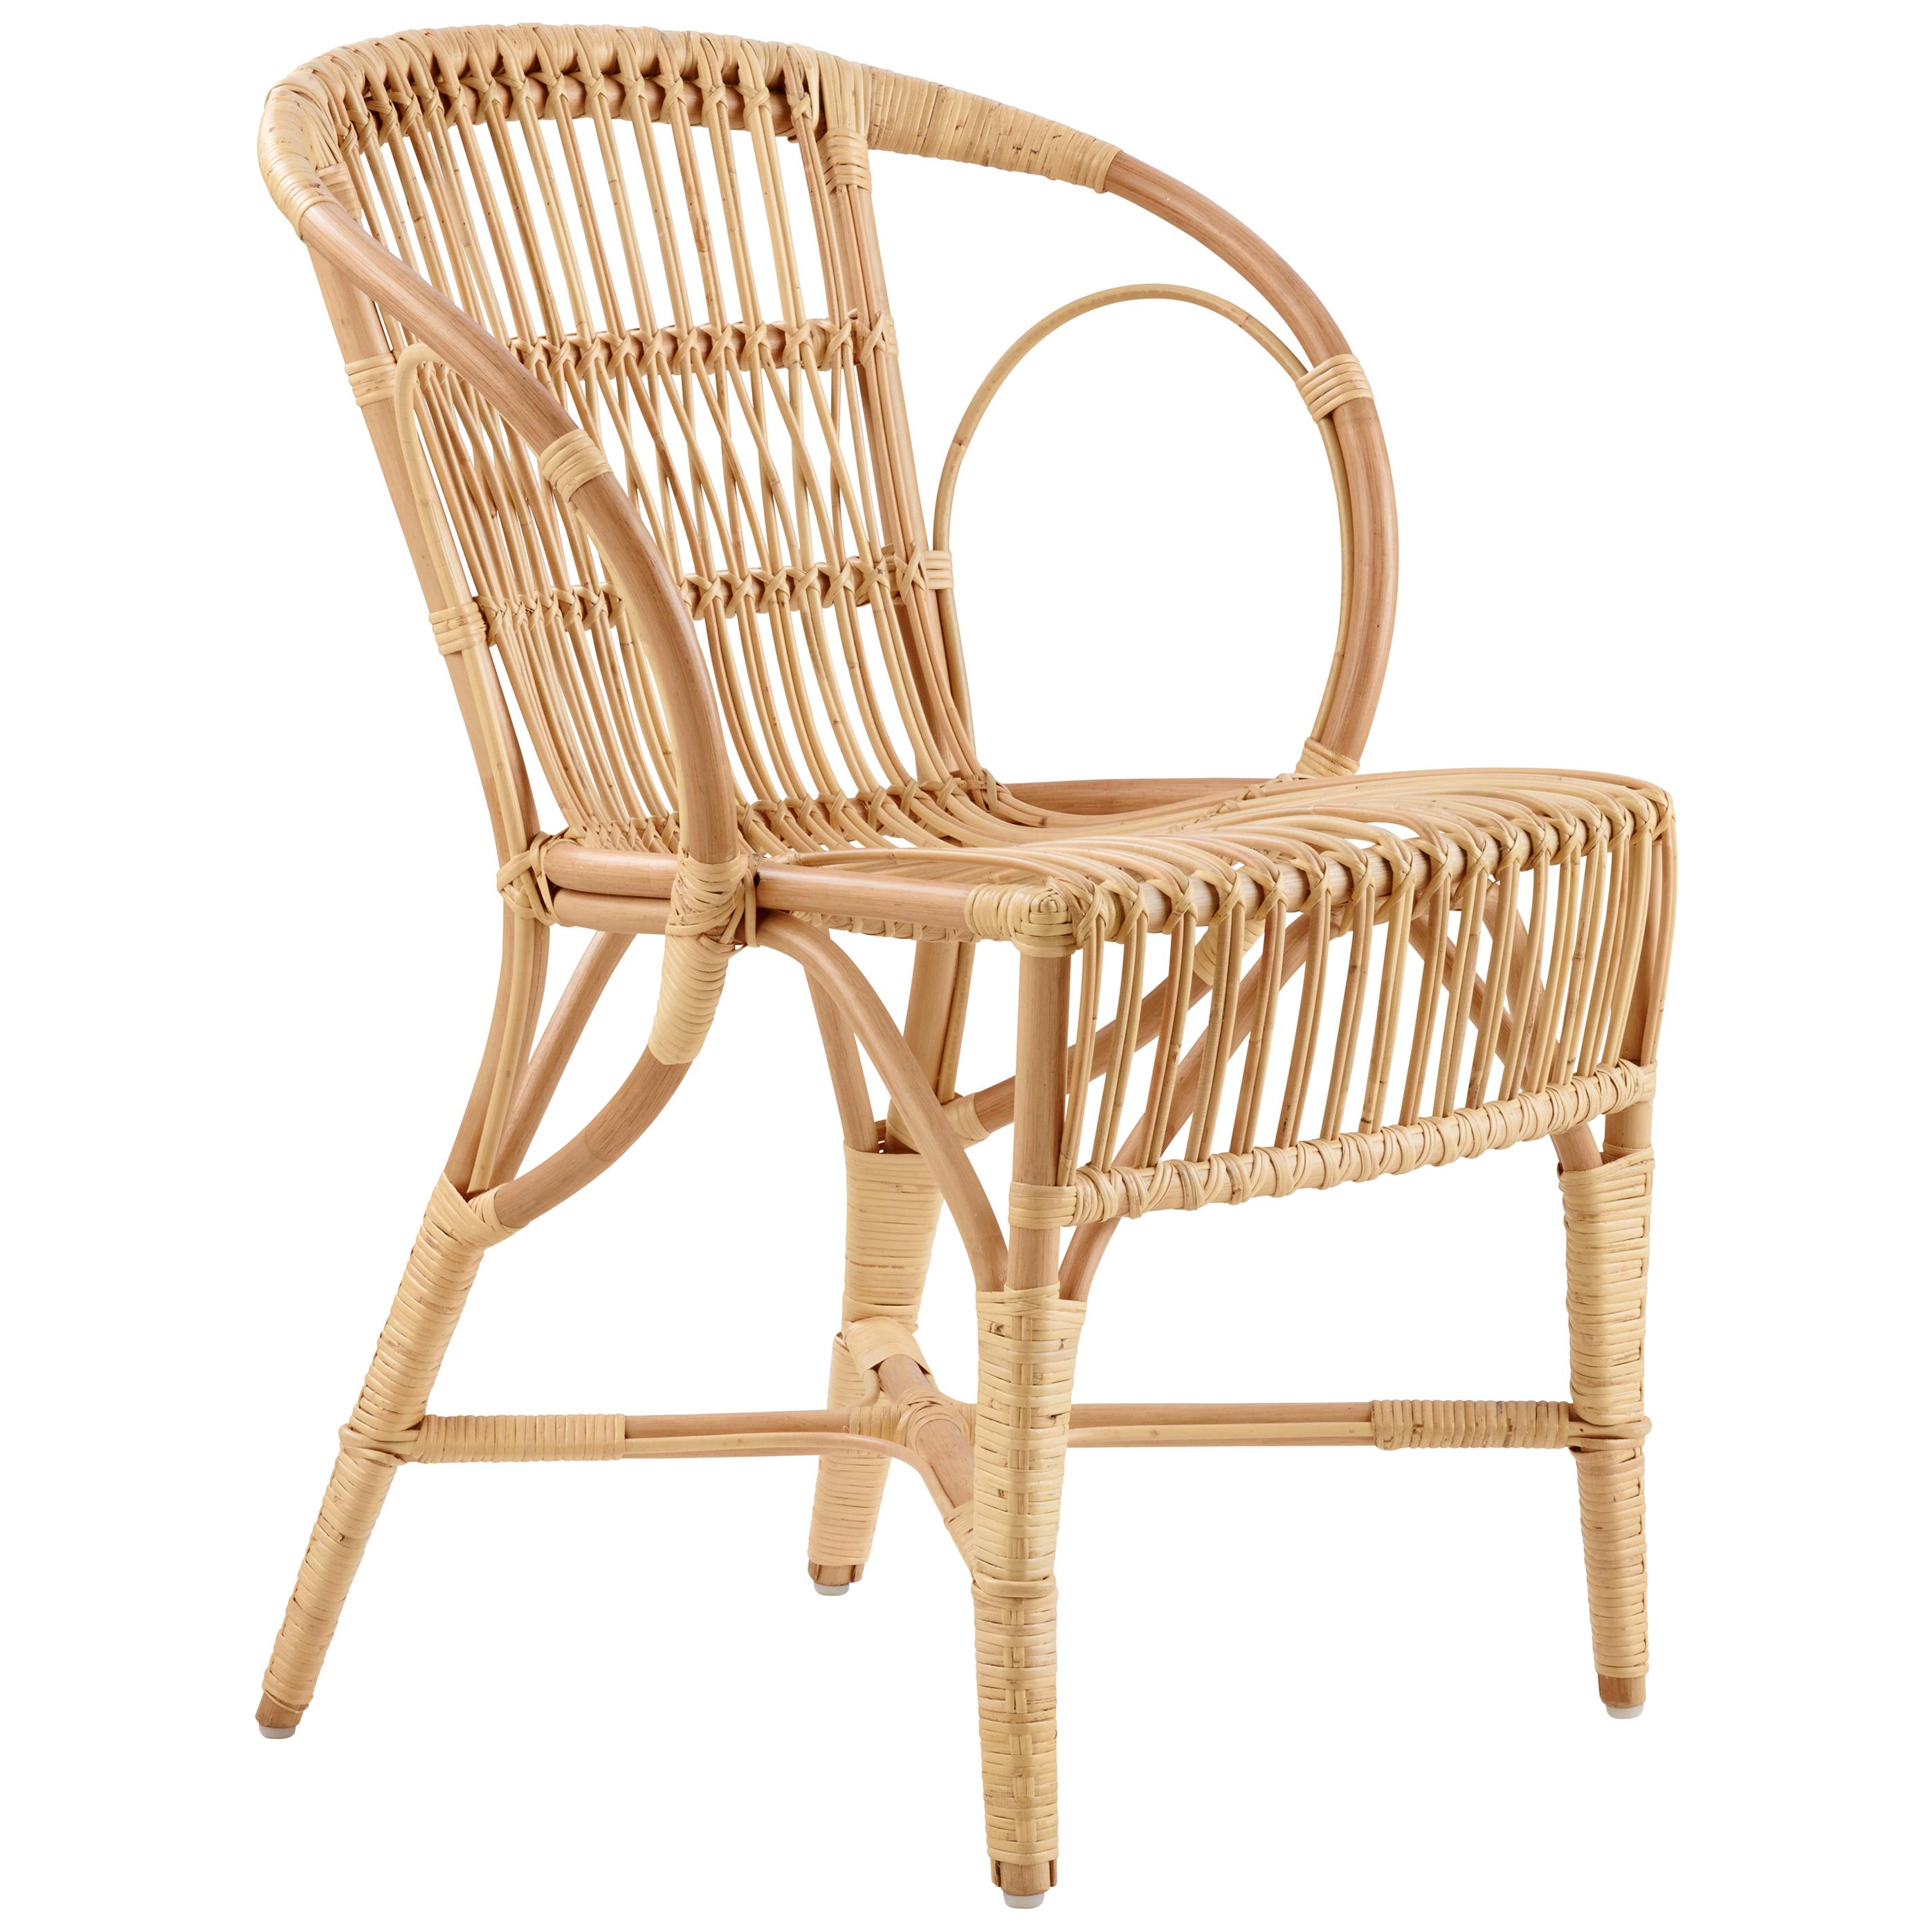 Polished Natural Rattan Robert Indoor Armchair by Sika Design